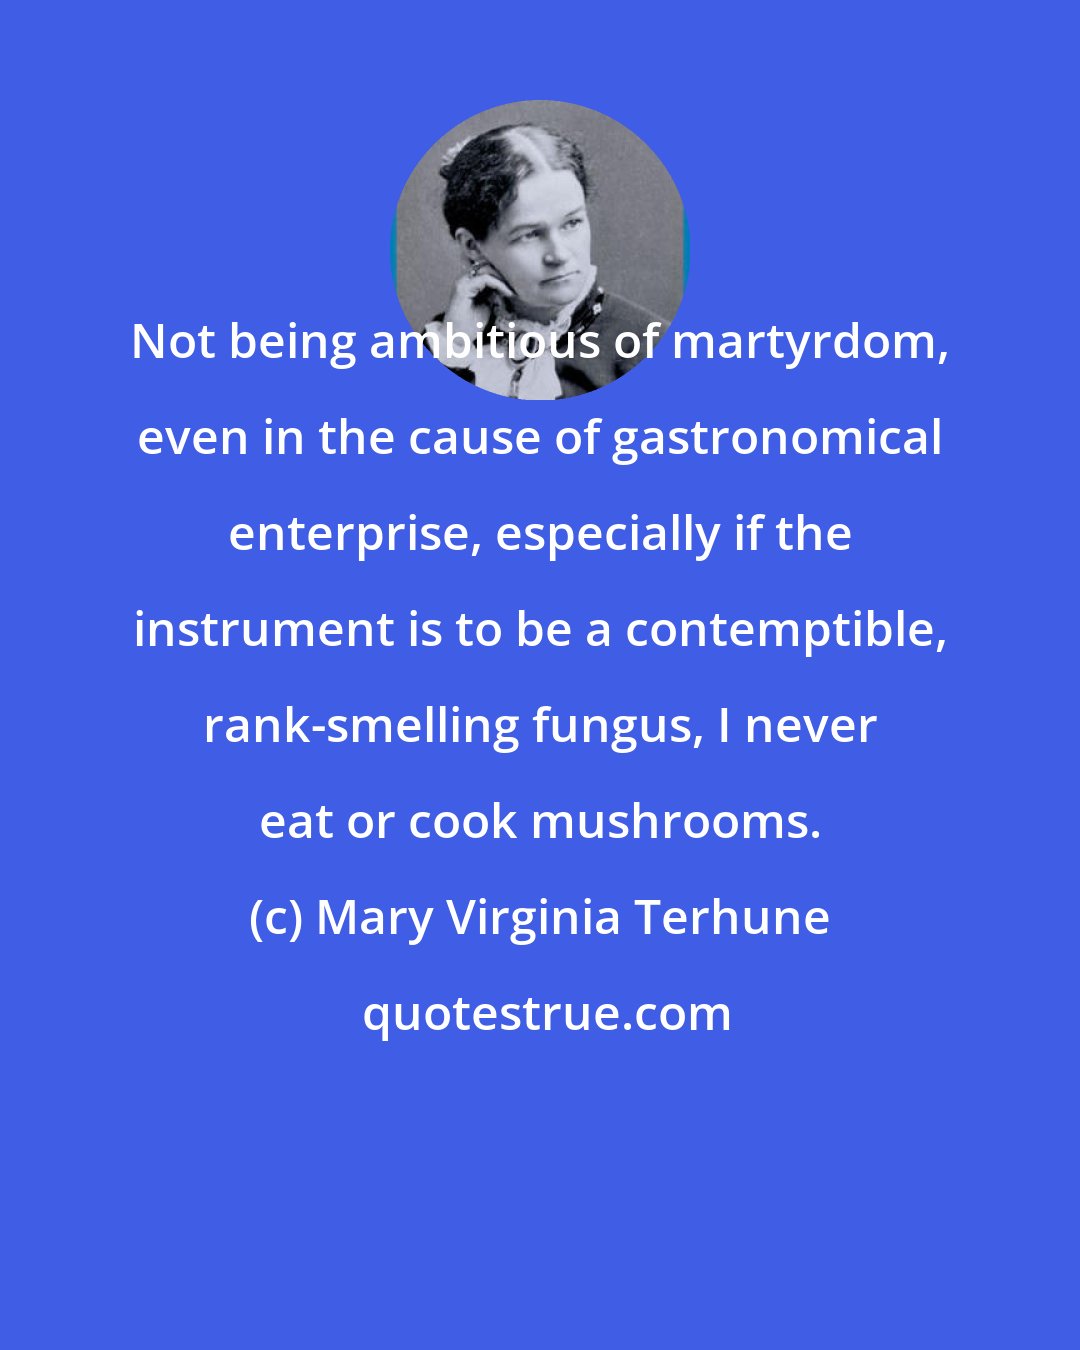 Mary Virginia Terhune: Not being ambitious of martyrdom, even in the cause of gastronomical enterprise, especially if the instrument is to be a contemptible, rank-smelling fungus, I never eat or cook mushrooms.